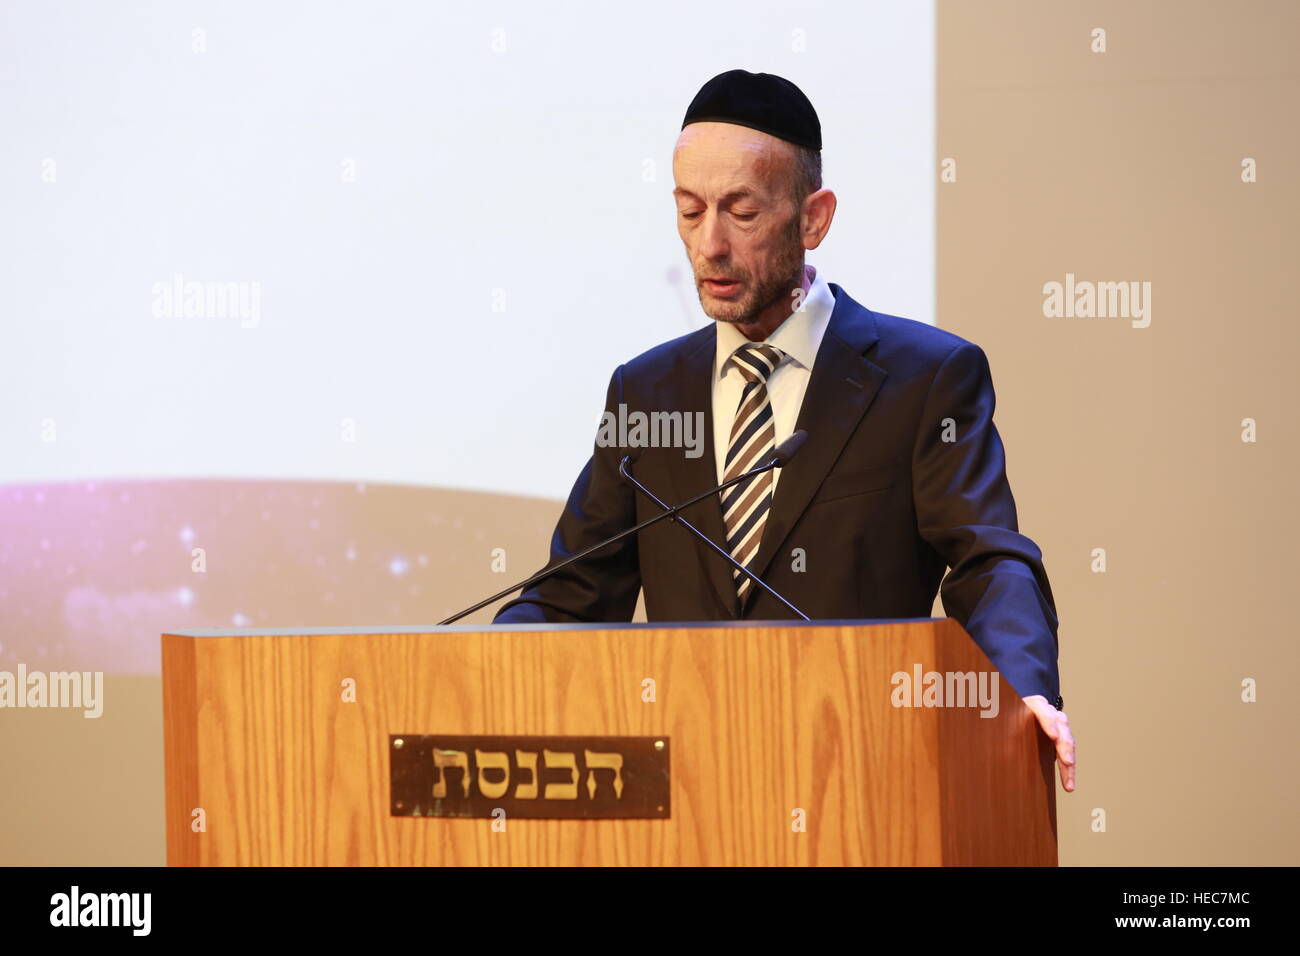 Rabbi Yisrael Meir Uri Maklev (born 10 January 1957) is an Israeli politician and member of the Knesset for the Haredi party Degel HaTorah, which toge Stock Photo